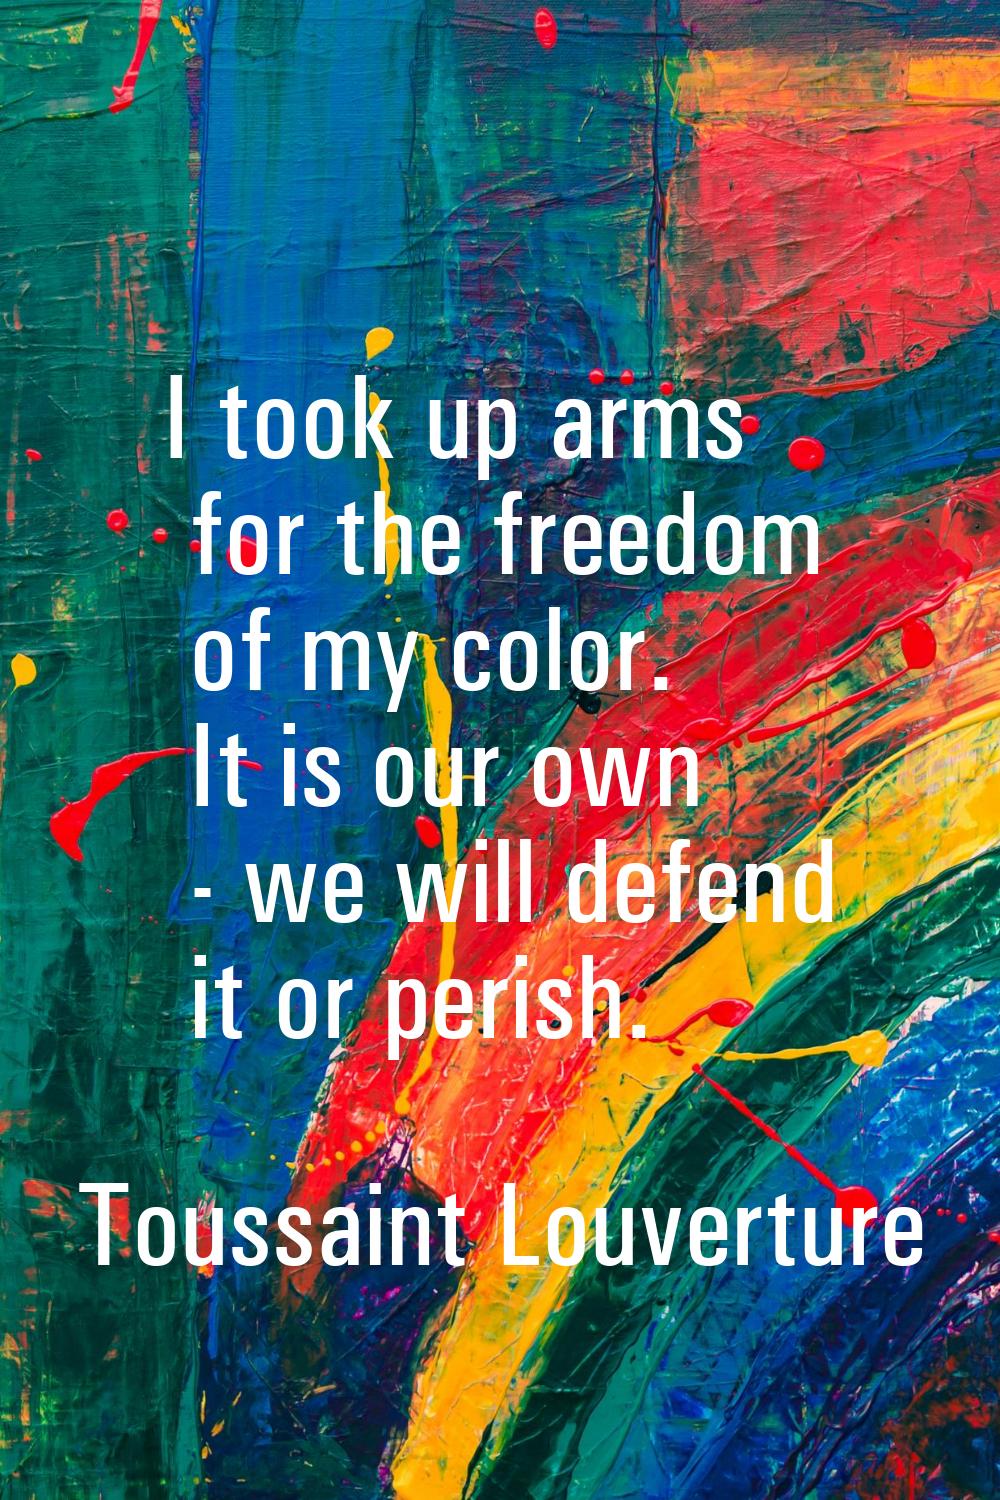 I took up arms for the freedom of my color. It is our own - we will defend it or perish.